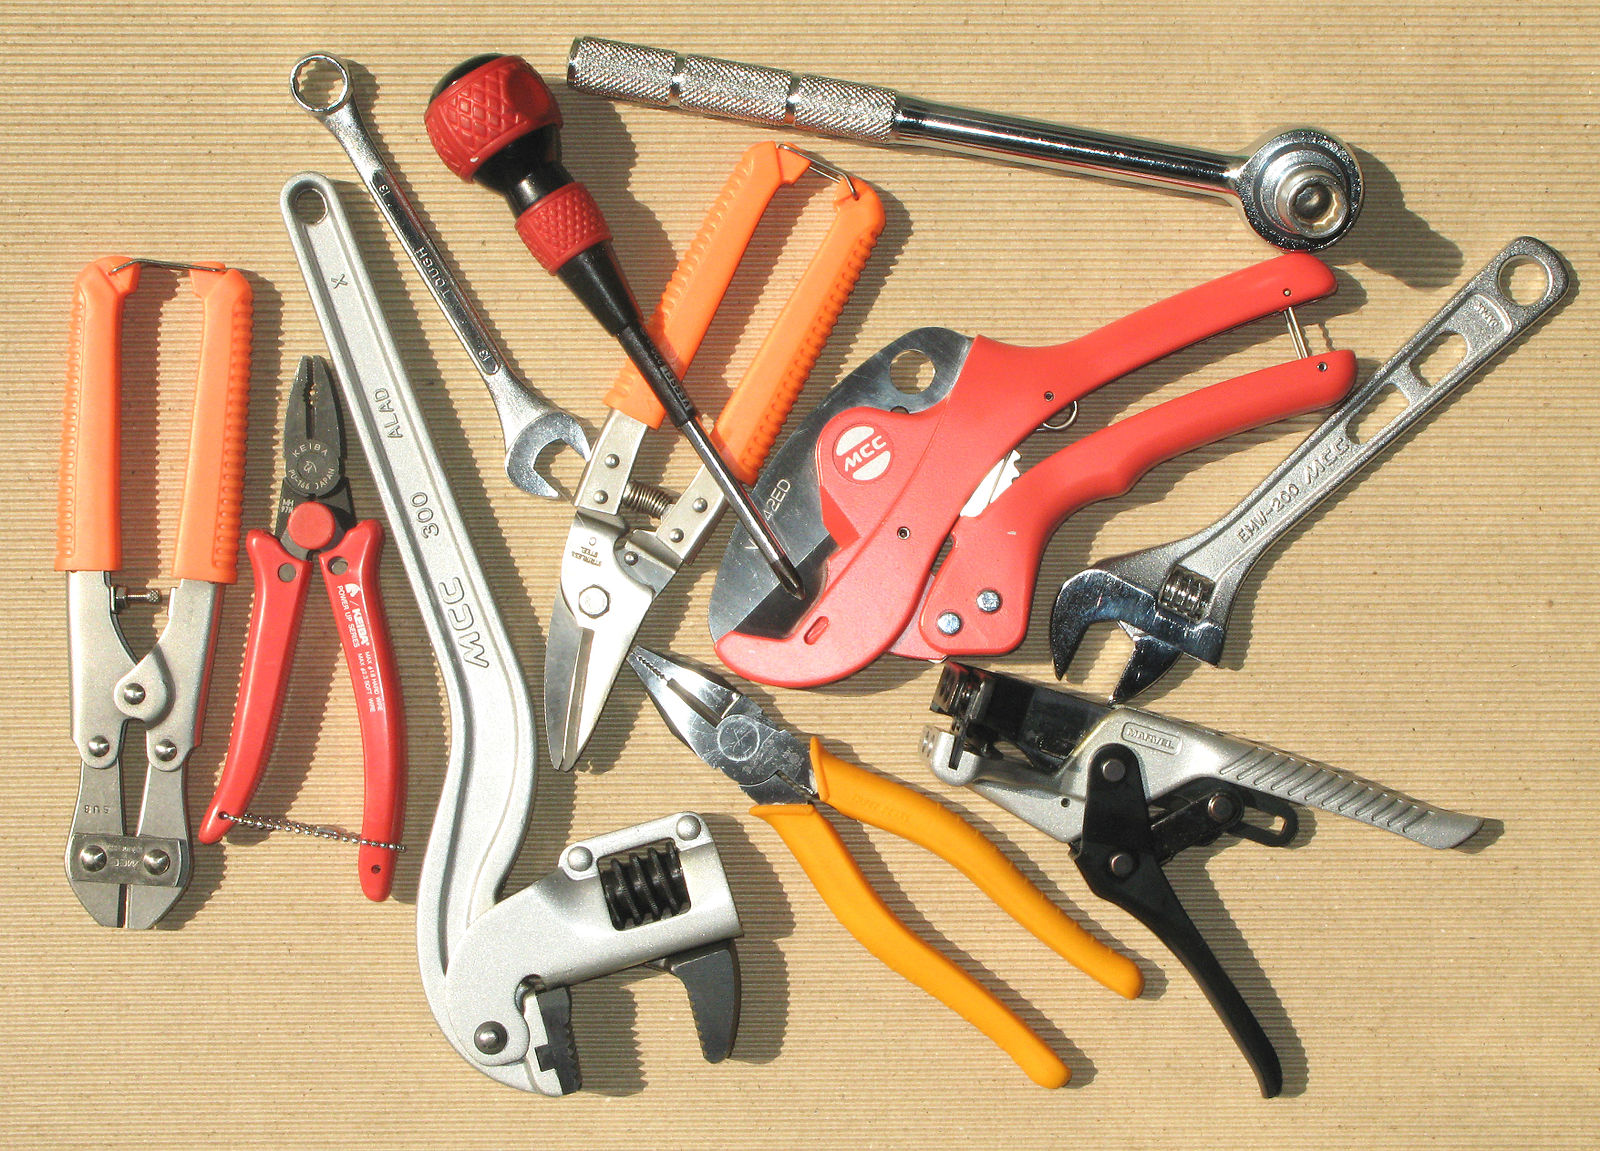 Hand Tools by M338 is licensed under Public Domain (http://commons.wikimedia.org/wiki/File:Hand_tools.jpg)